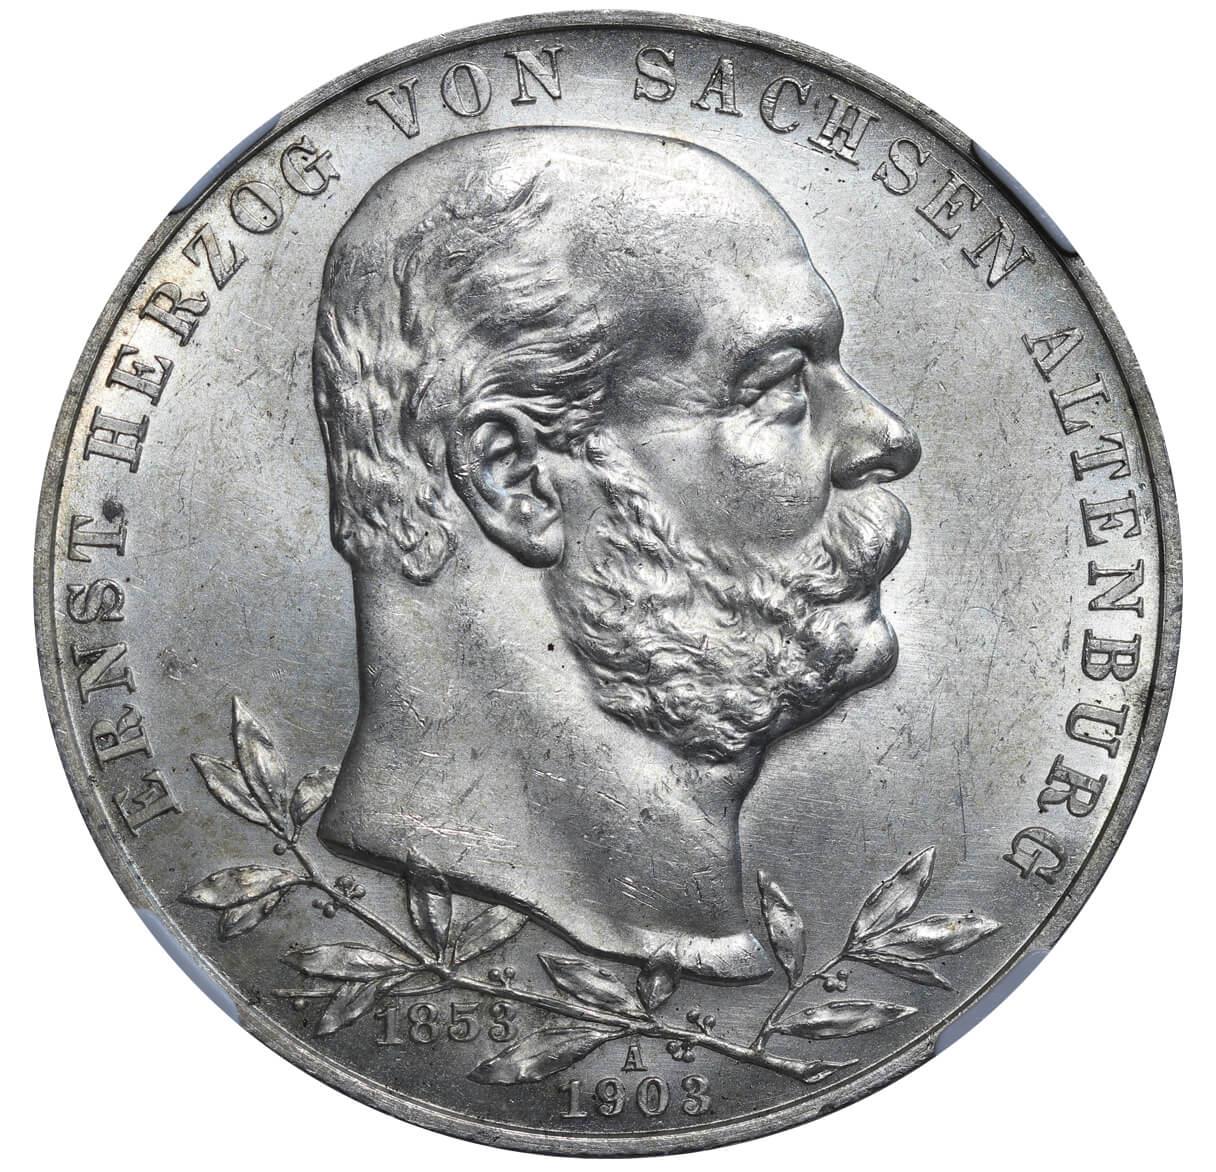 Duchy of Saxe-Altenburg, 5 Mark, 1903 year, A, 50th Anniversary of the Reign of Ernst I, NGC, MS 63 - Image 2 of 3